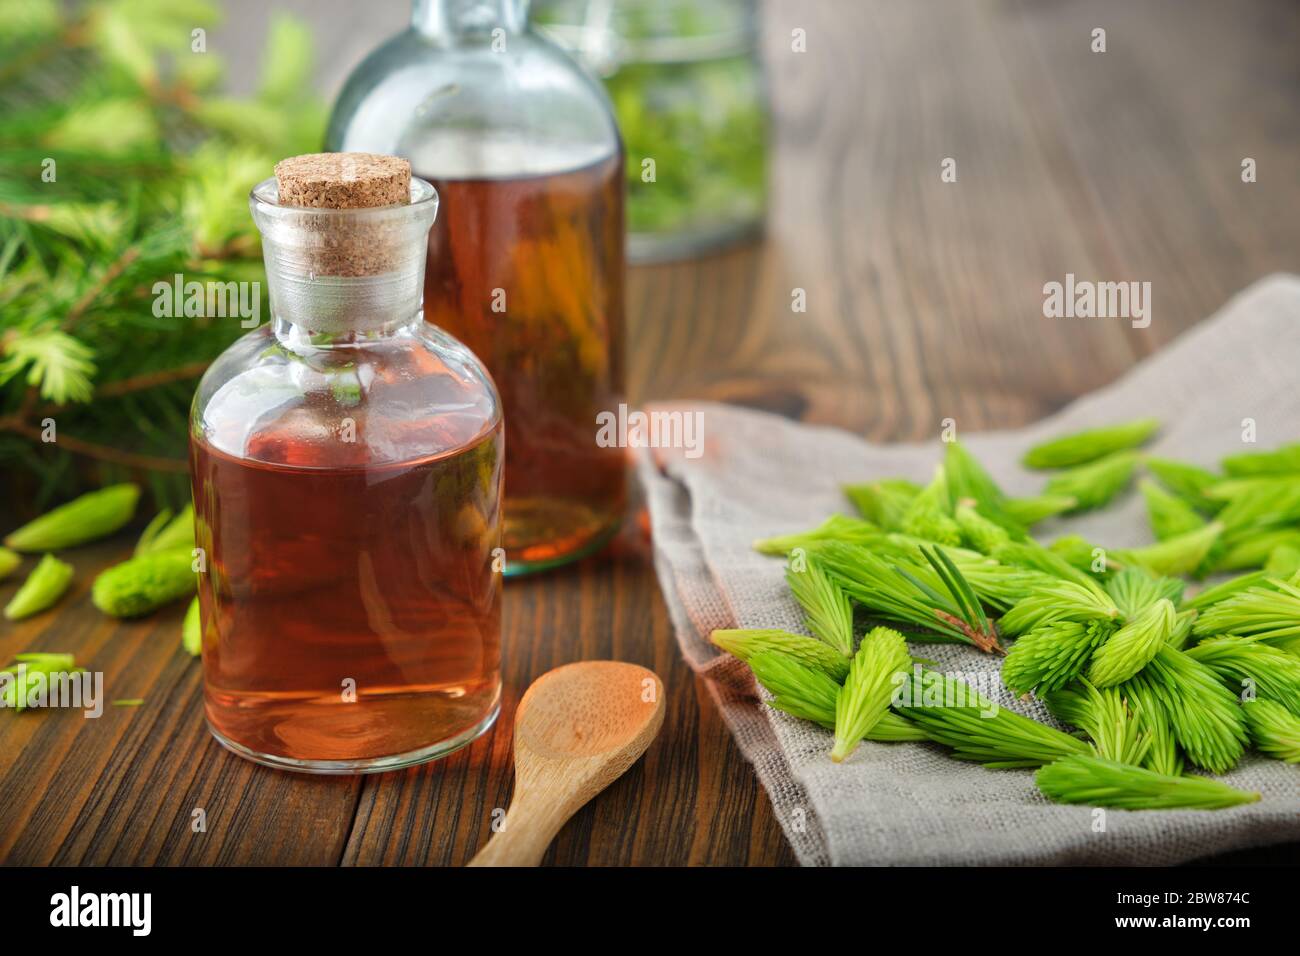 Bottles of potion, syrup or honey from fir buds and needles, twigs of fir tree on wooden table. Stock Photo